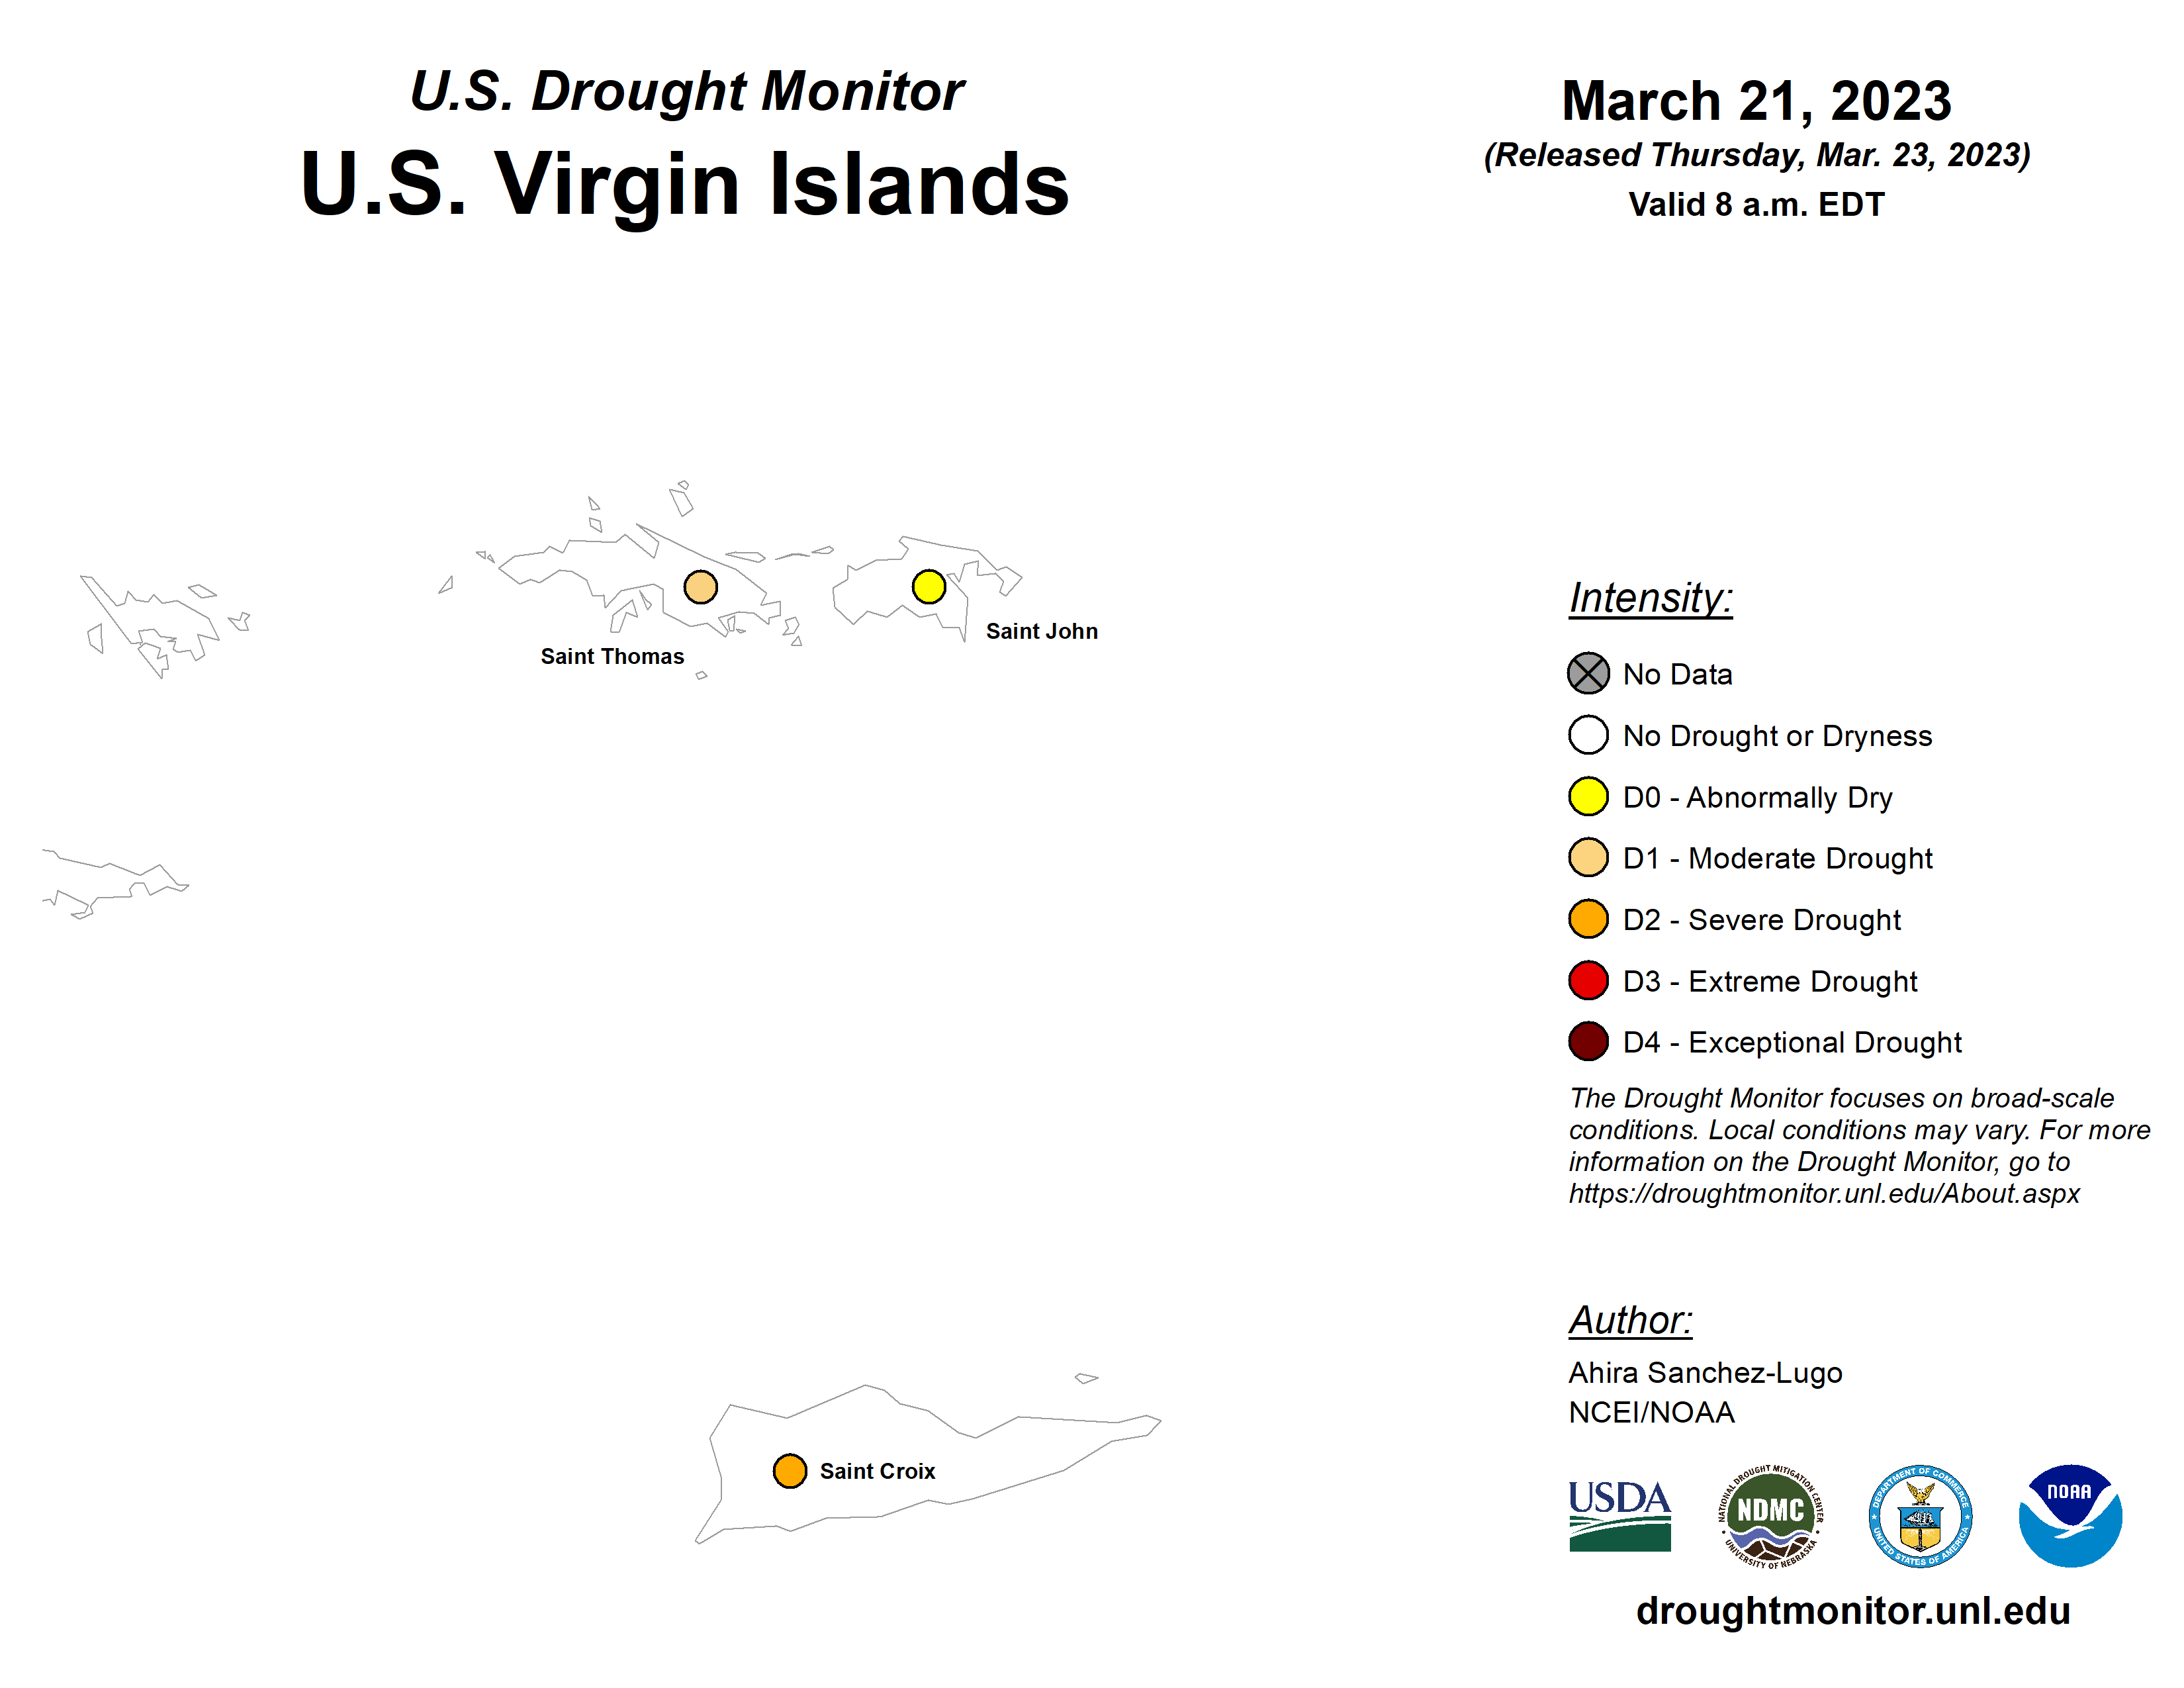 A U.S. Drought Monitor map of the USVI detailing the status of the drought in the territory.